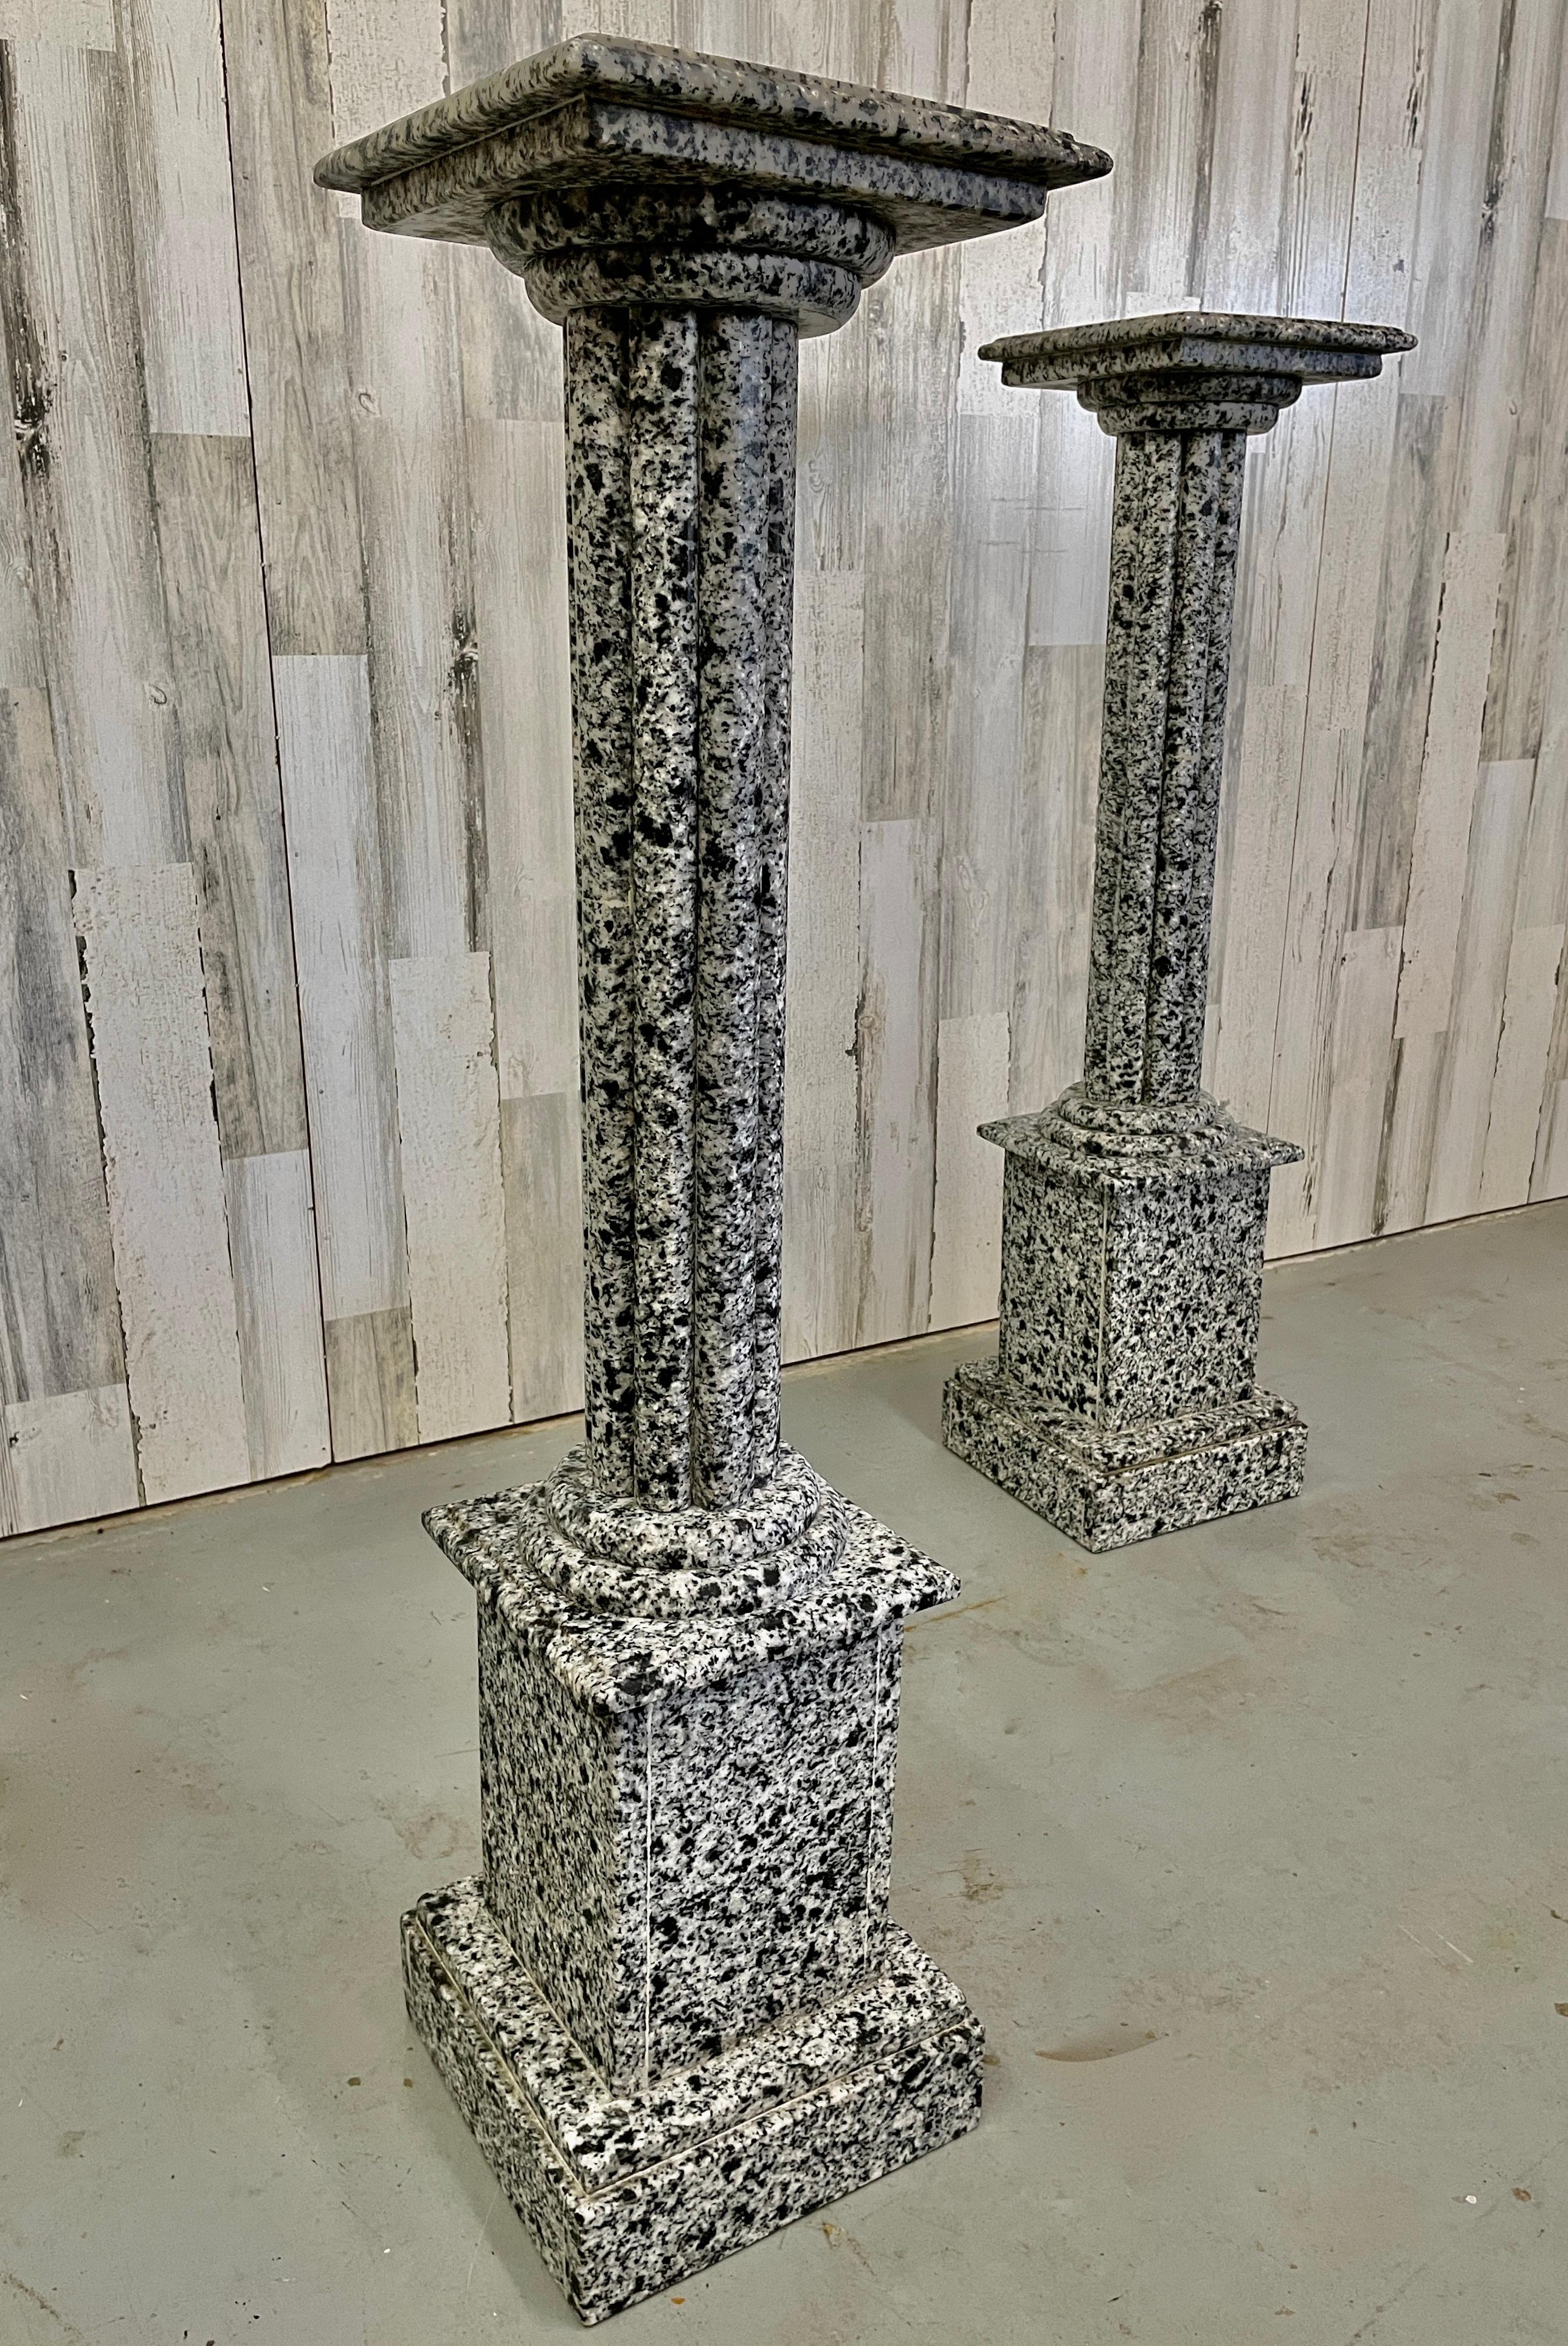 Pair of Dalmation Black and White Speckle Granite Architectural Columns/ Plant Stand.